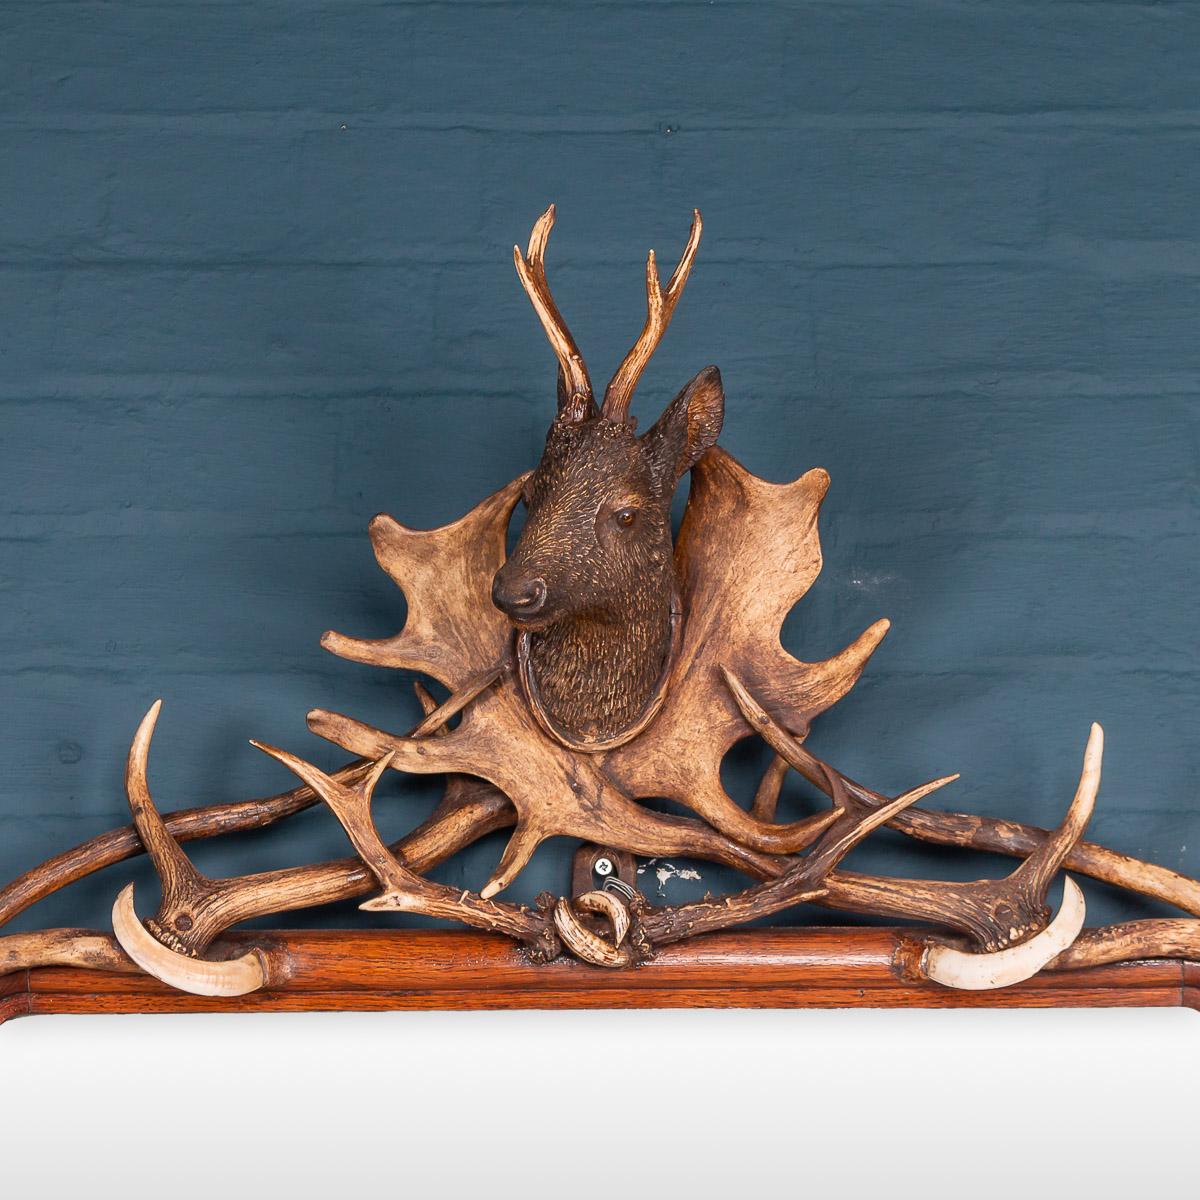 An extremely unusual hall mirror dating to the latter part of the 19th century or early 20th century. Original mercury mirror, the wood frame decorated with carved black forest animals in softwood, antler horns and ivory boar